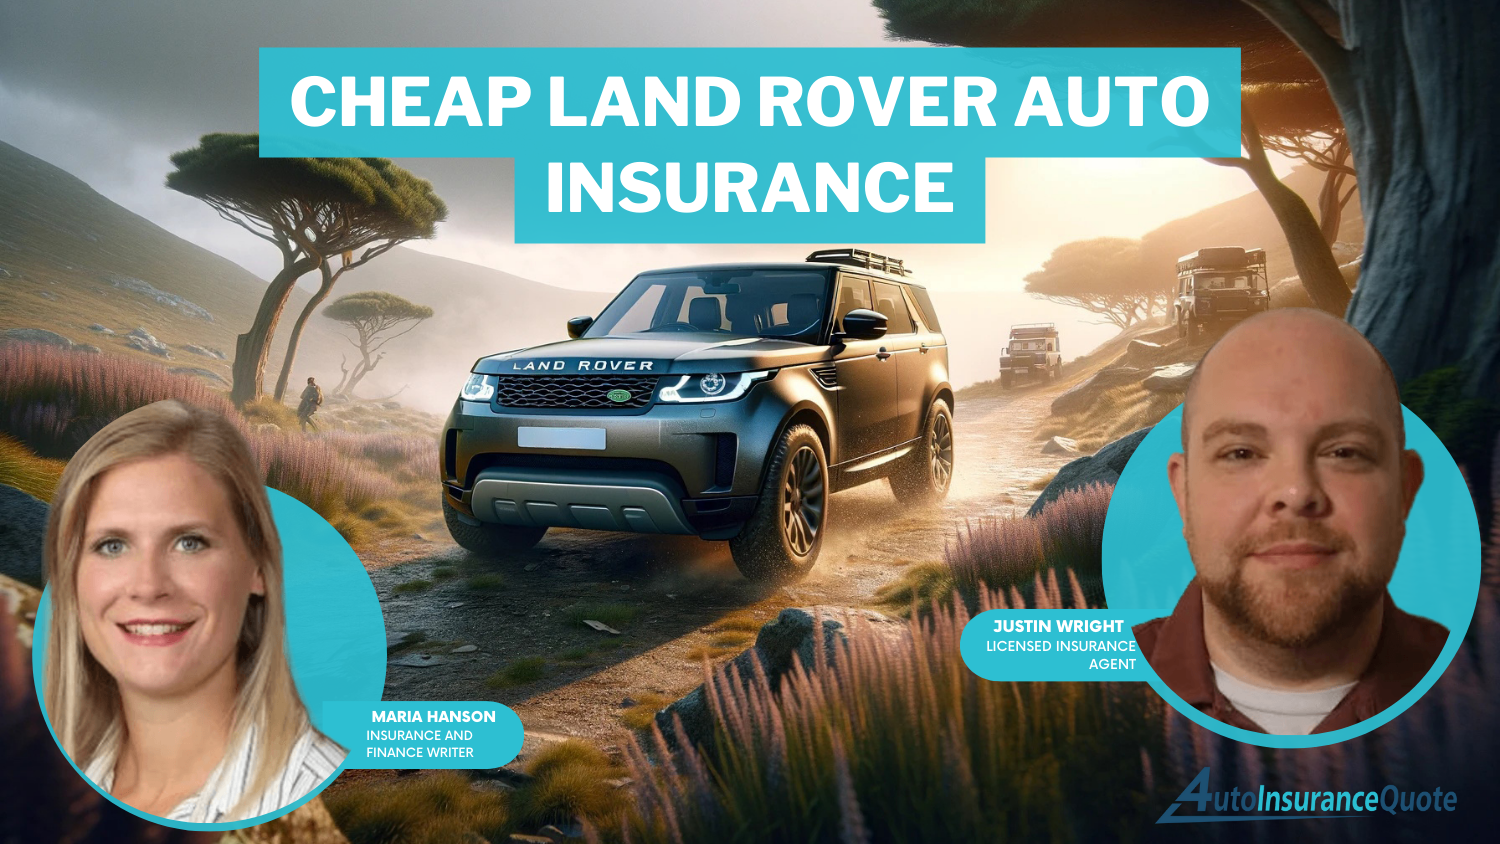 Cheap Land Rover Auto Insurance: Geico, American Family, and State Farm